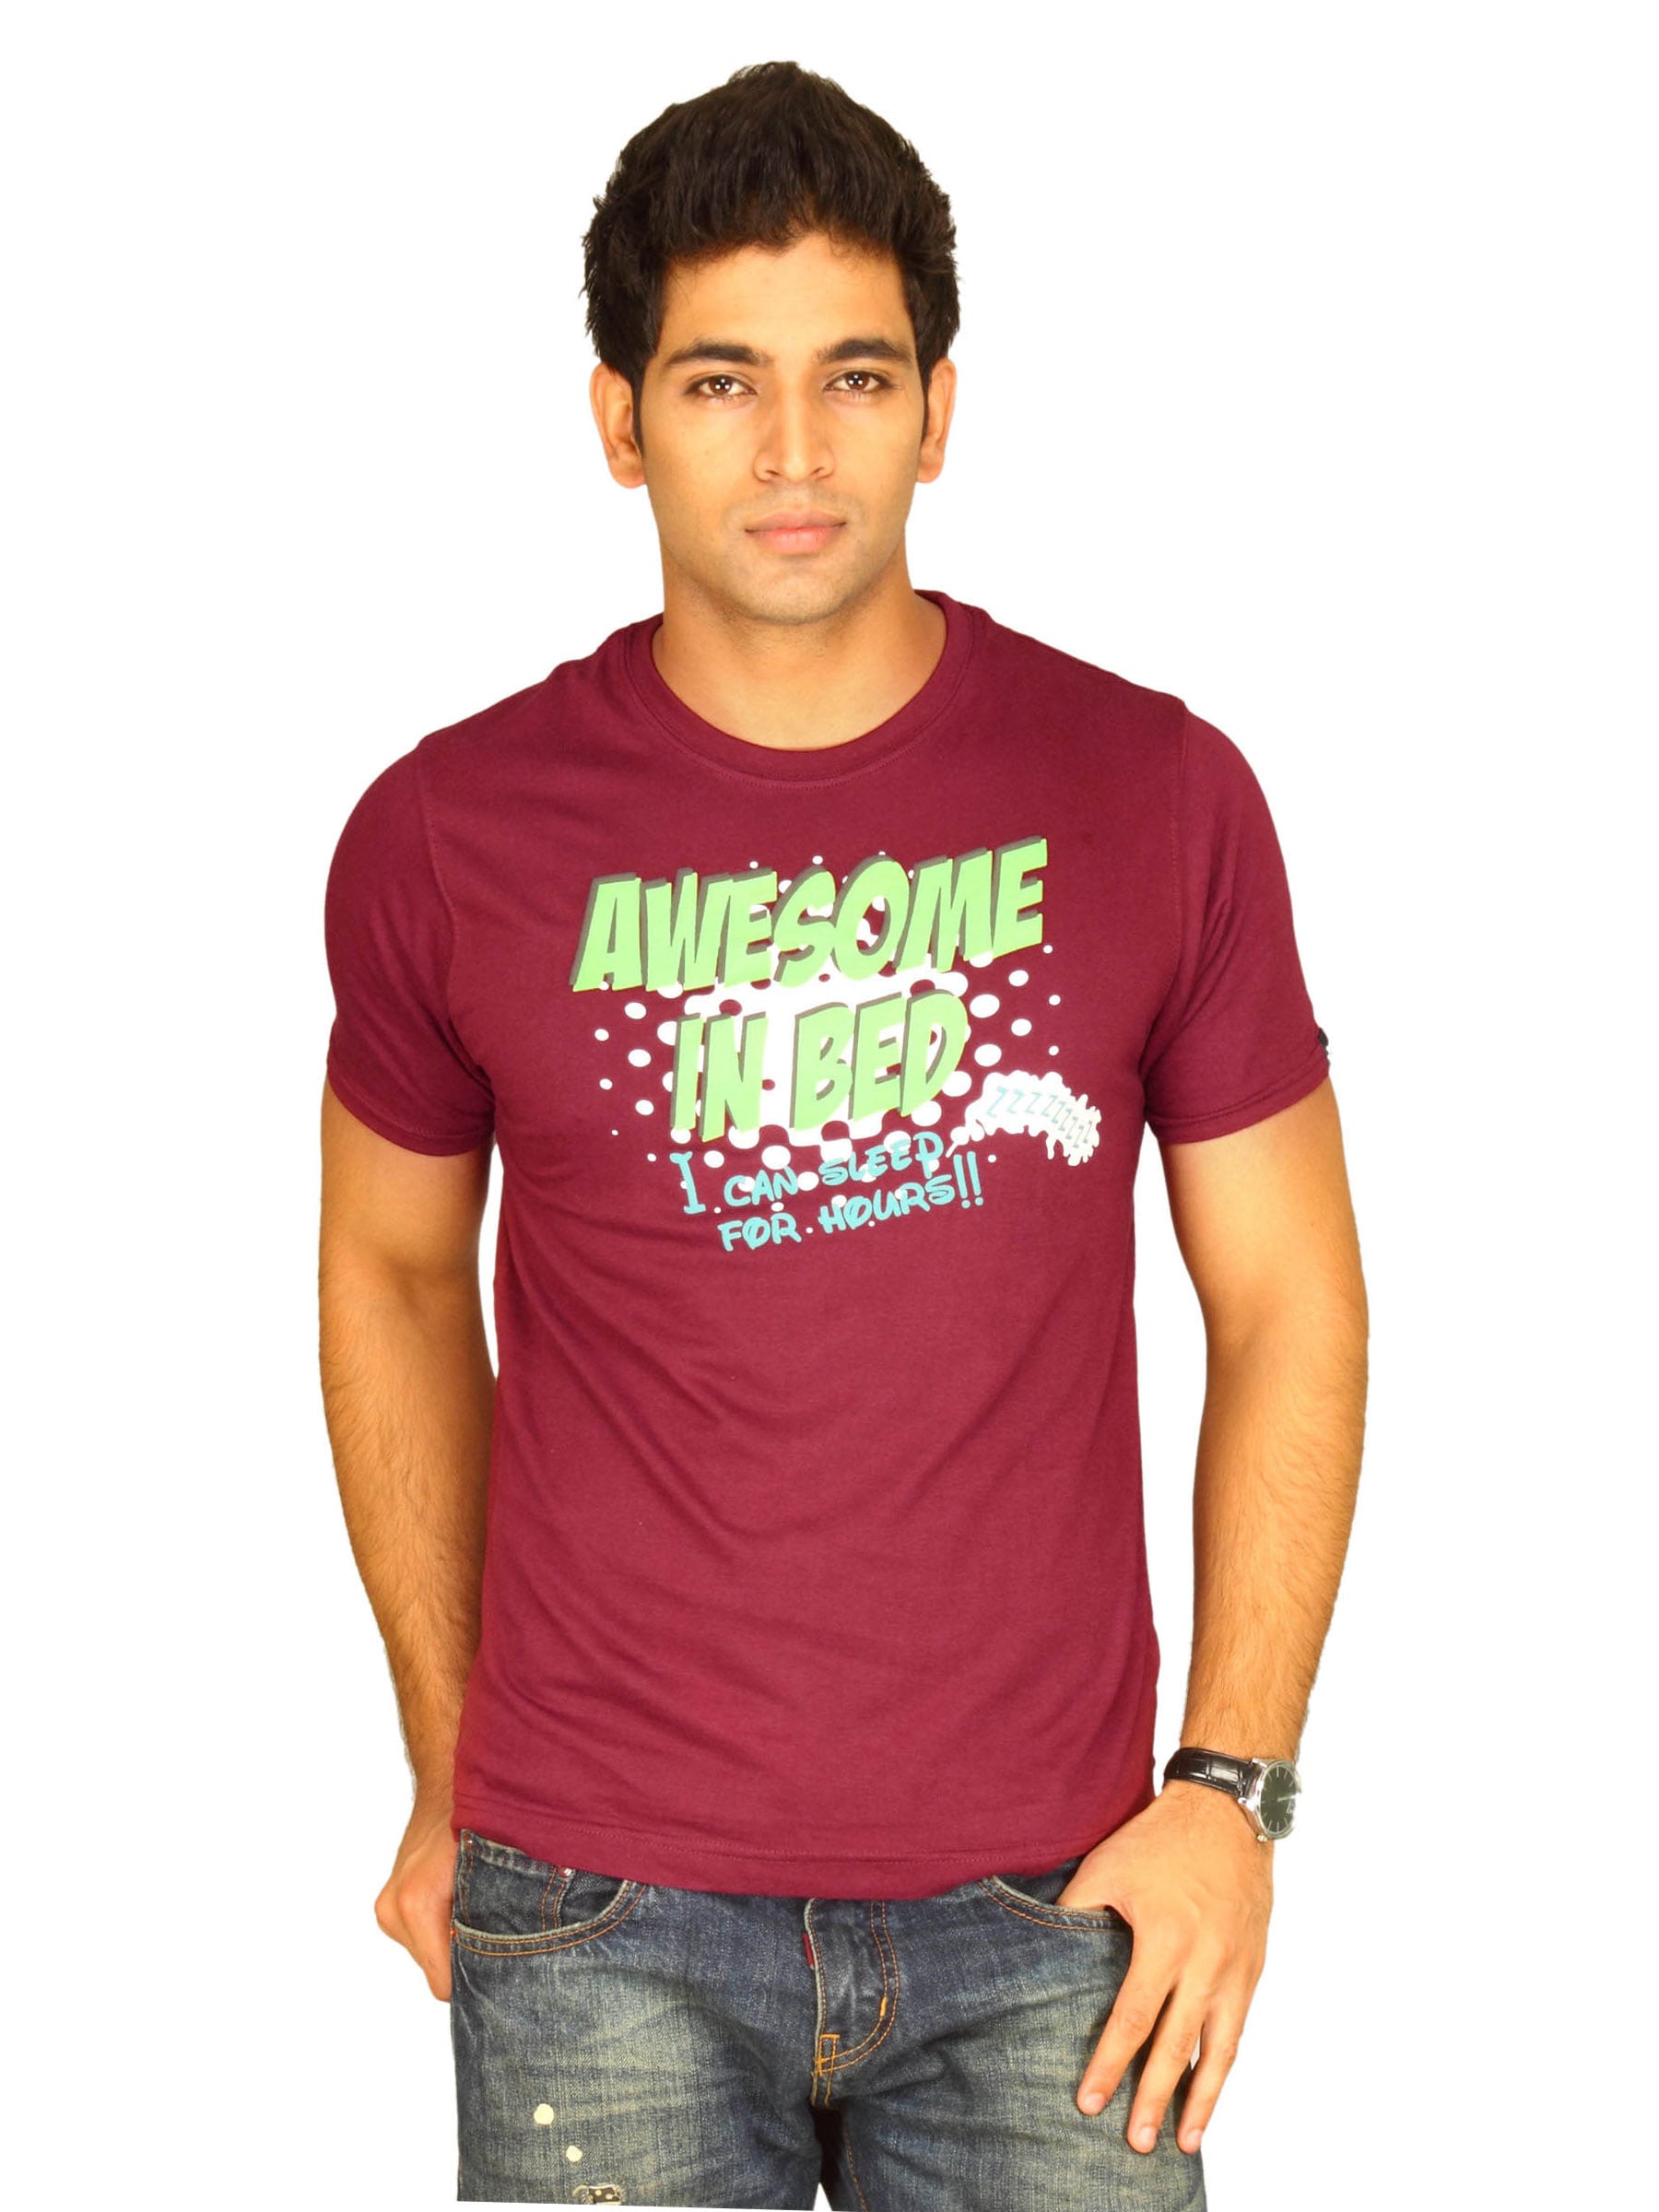 Probase Men's Awesome In Bed Maroon Tshirt